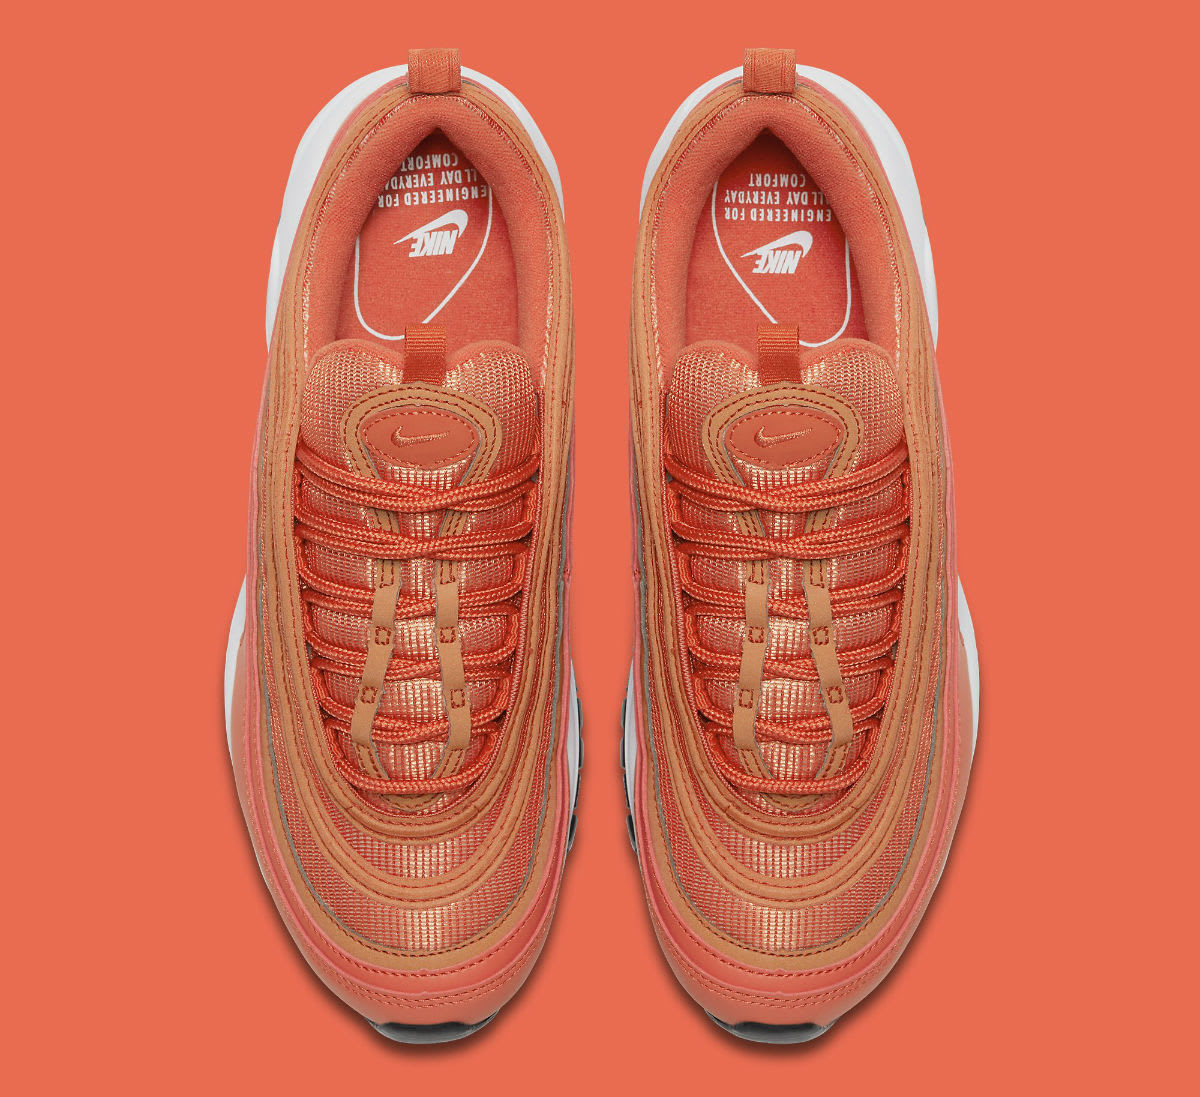 Nike Air Max 97 Safety Orange Release Date 921733-800 Top